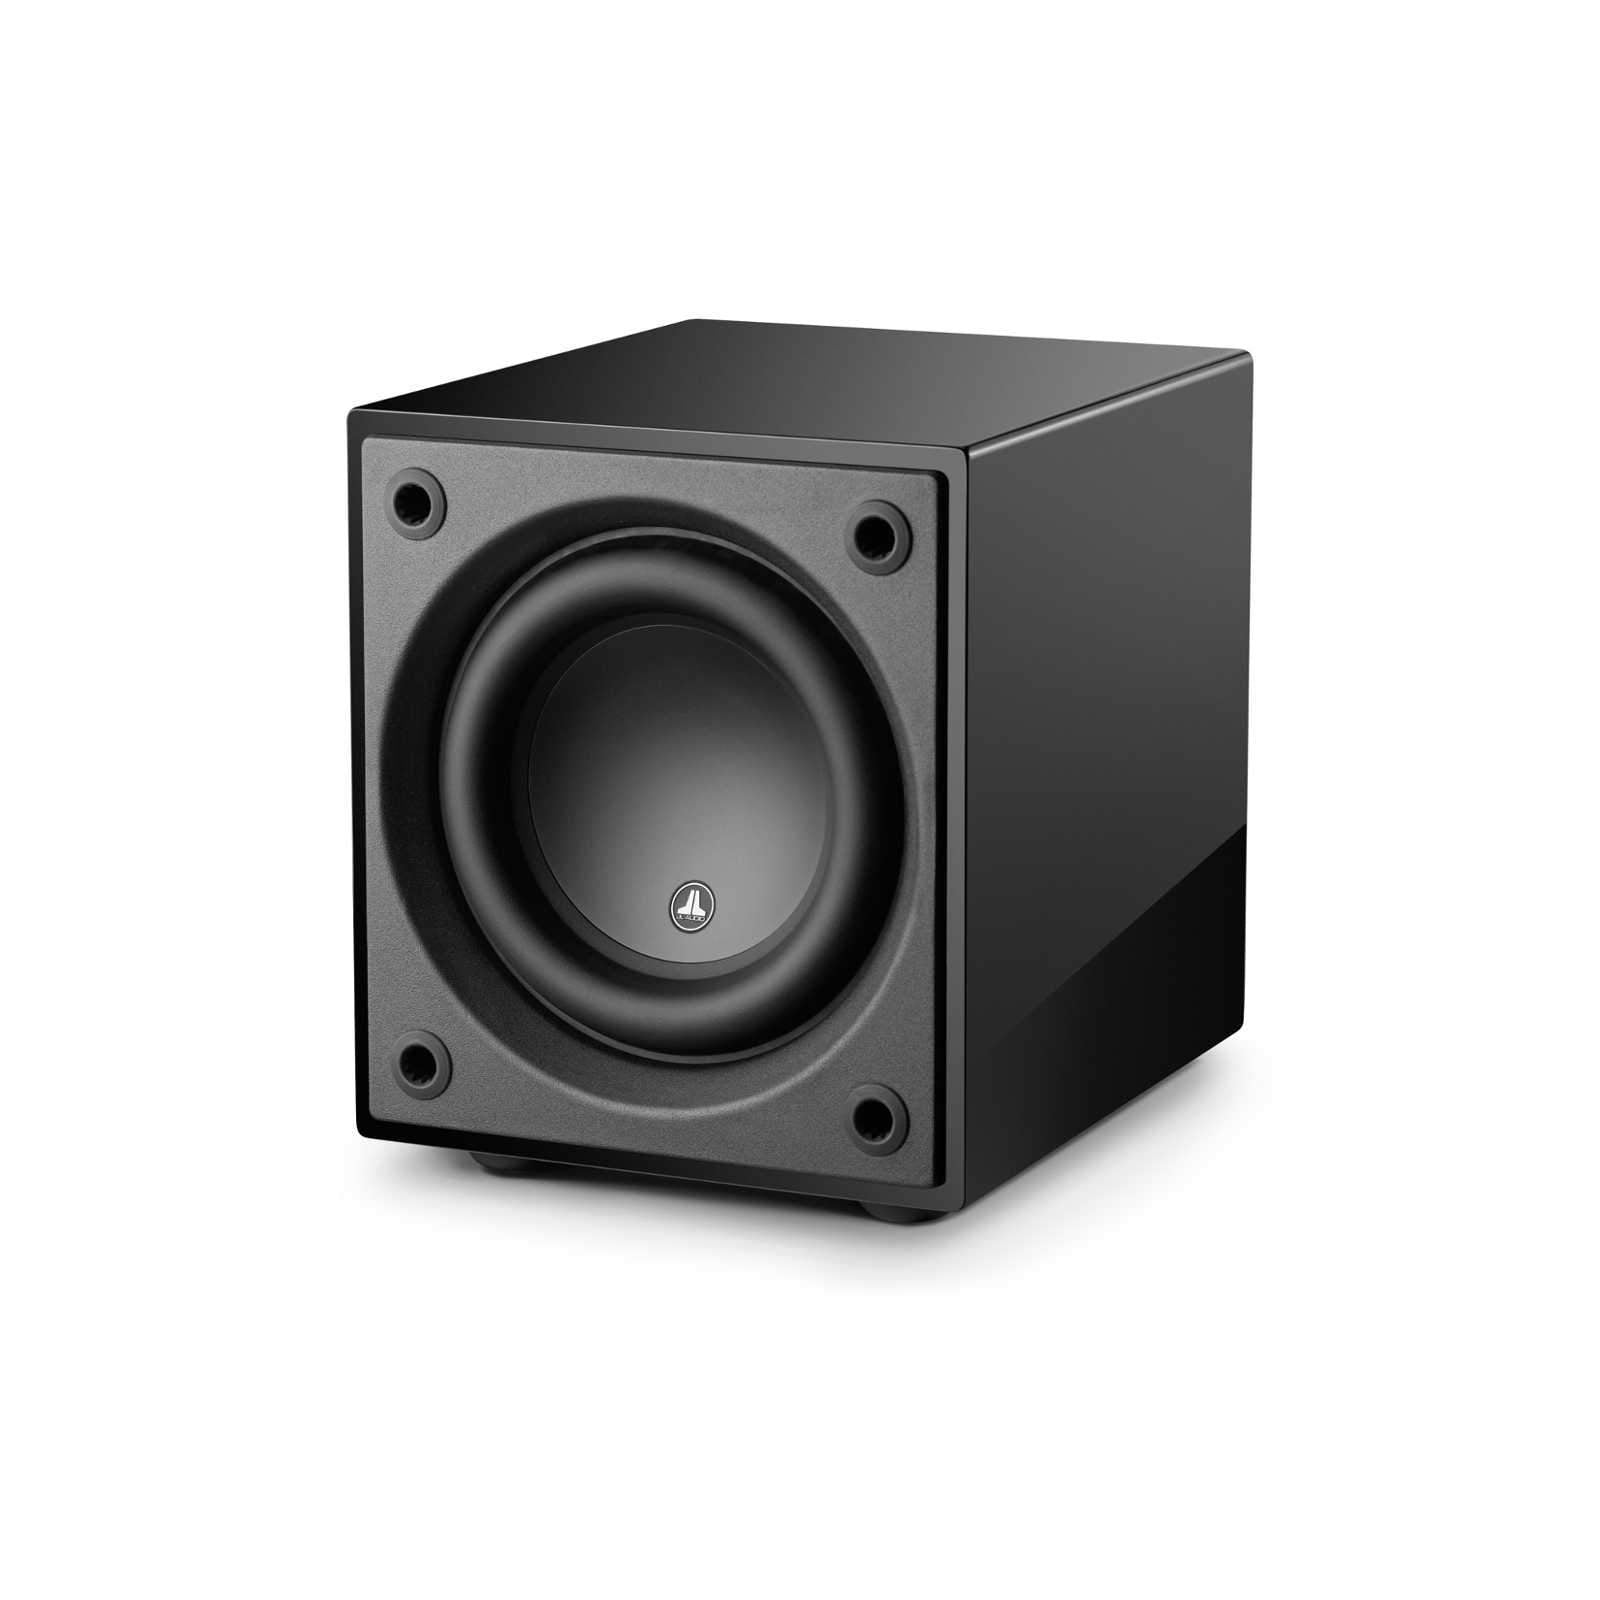 JL Audio Dominion D110 10" 750W Subwoofer - Gloss Black - The Audio Experts